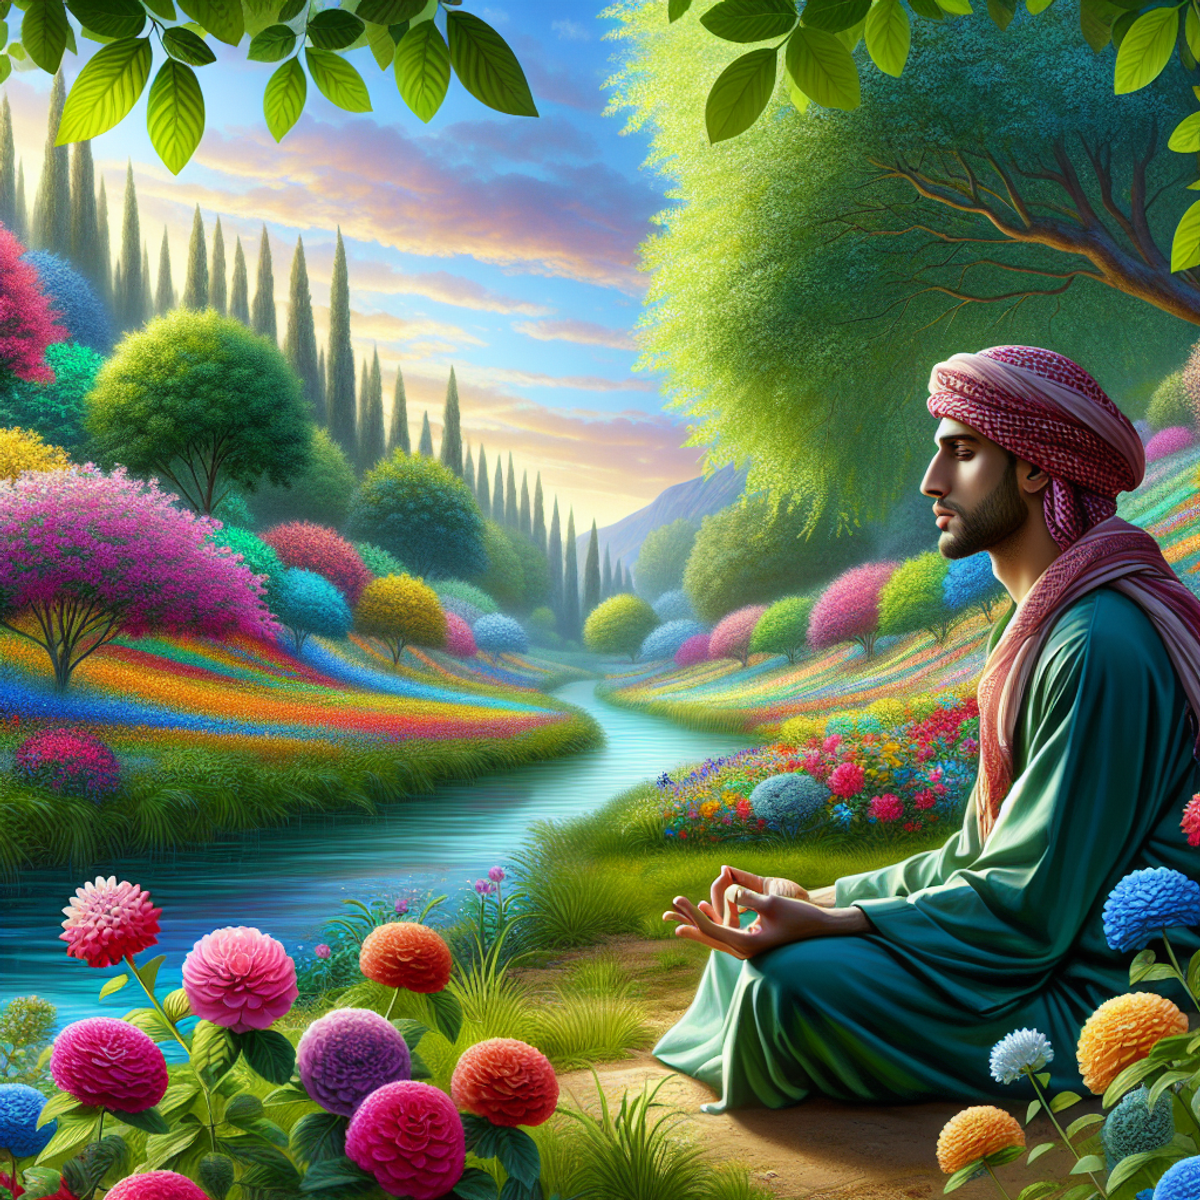 A man meditating in a vibrant, colorful landscape surrounded by lush green foliage and brightly blossomed flowers.